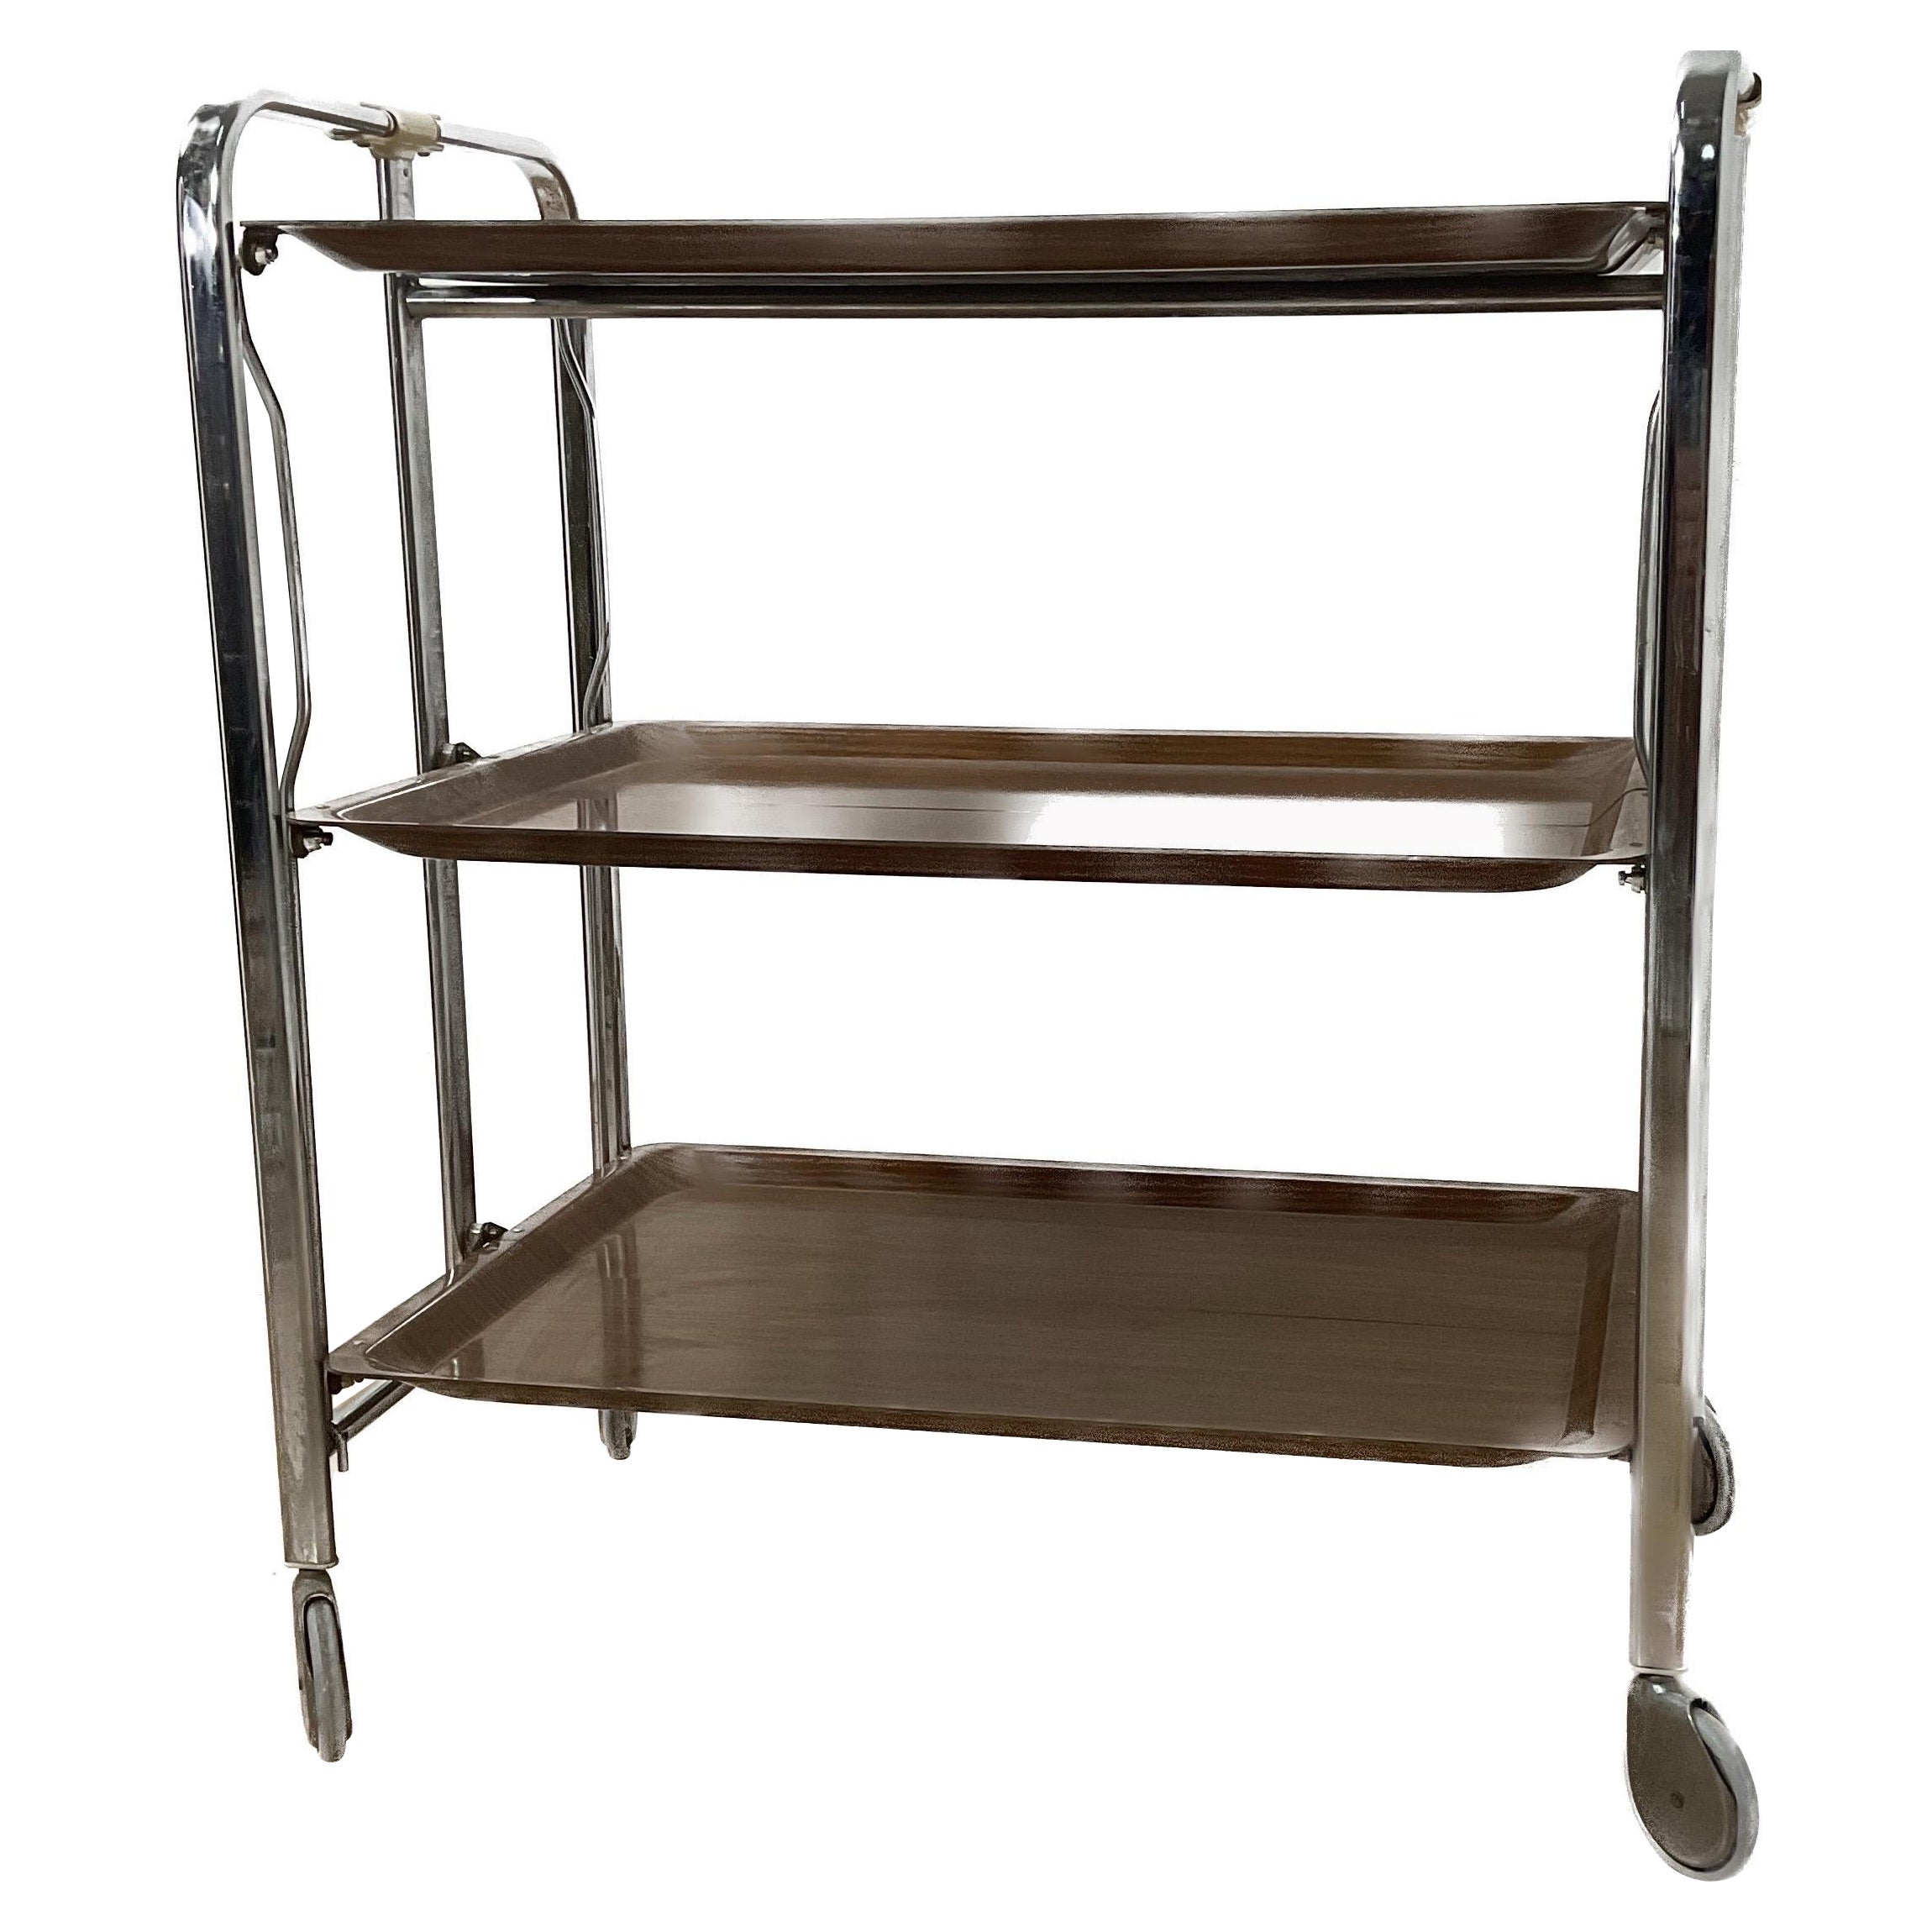 Modern Midcentury Serving Trolly For Sale